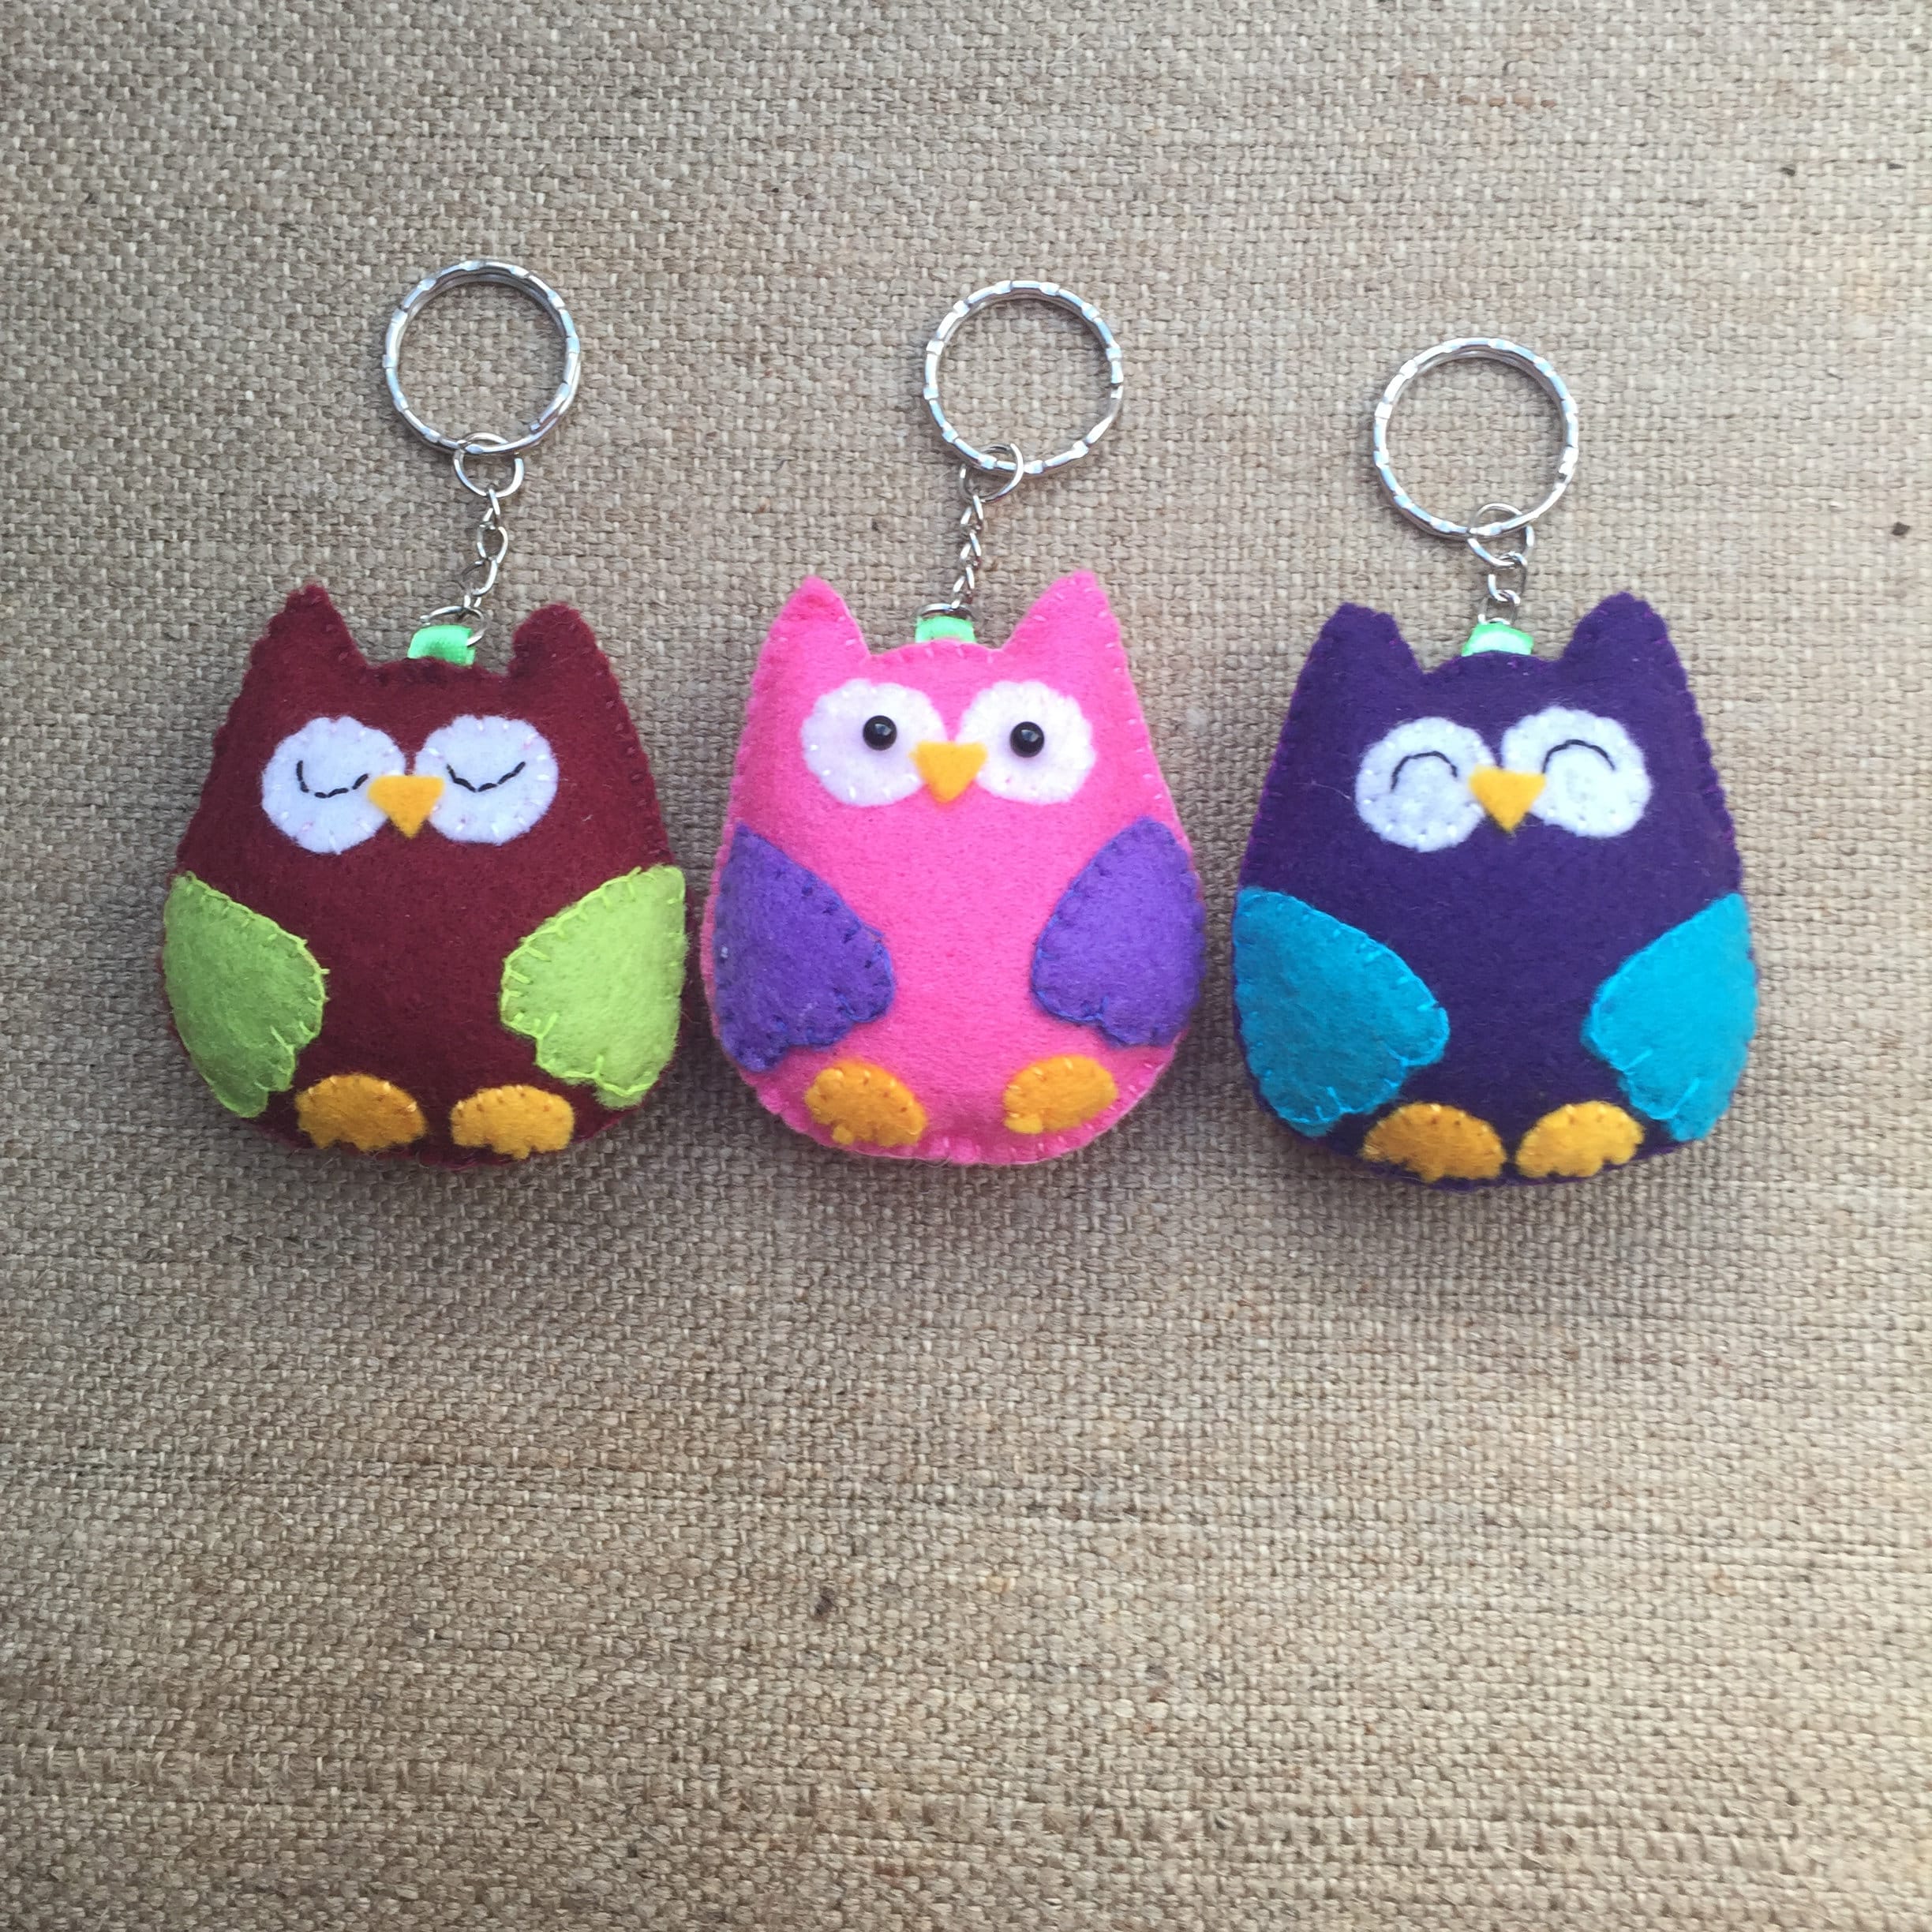 1pc Women's Mini Owl Shaped Coin Purse With Keyring Pink Cute  Multi-functional Small Makeup Bag